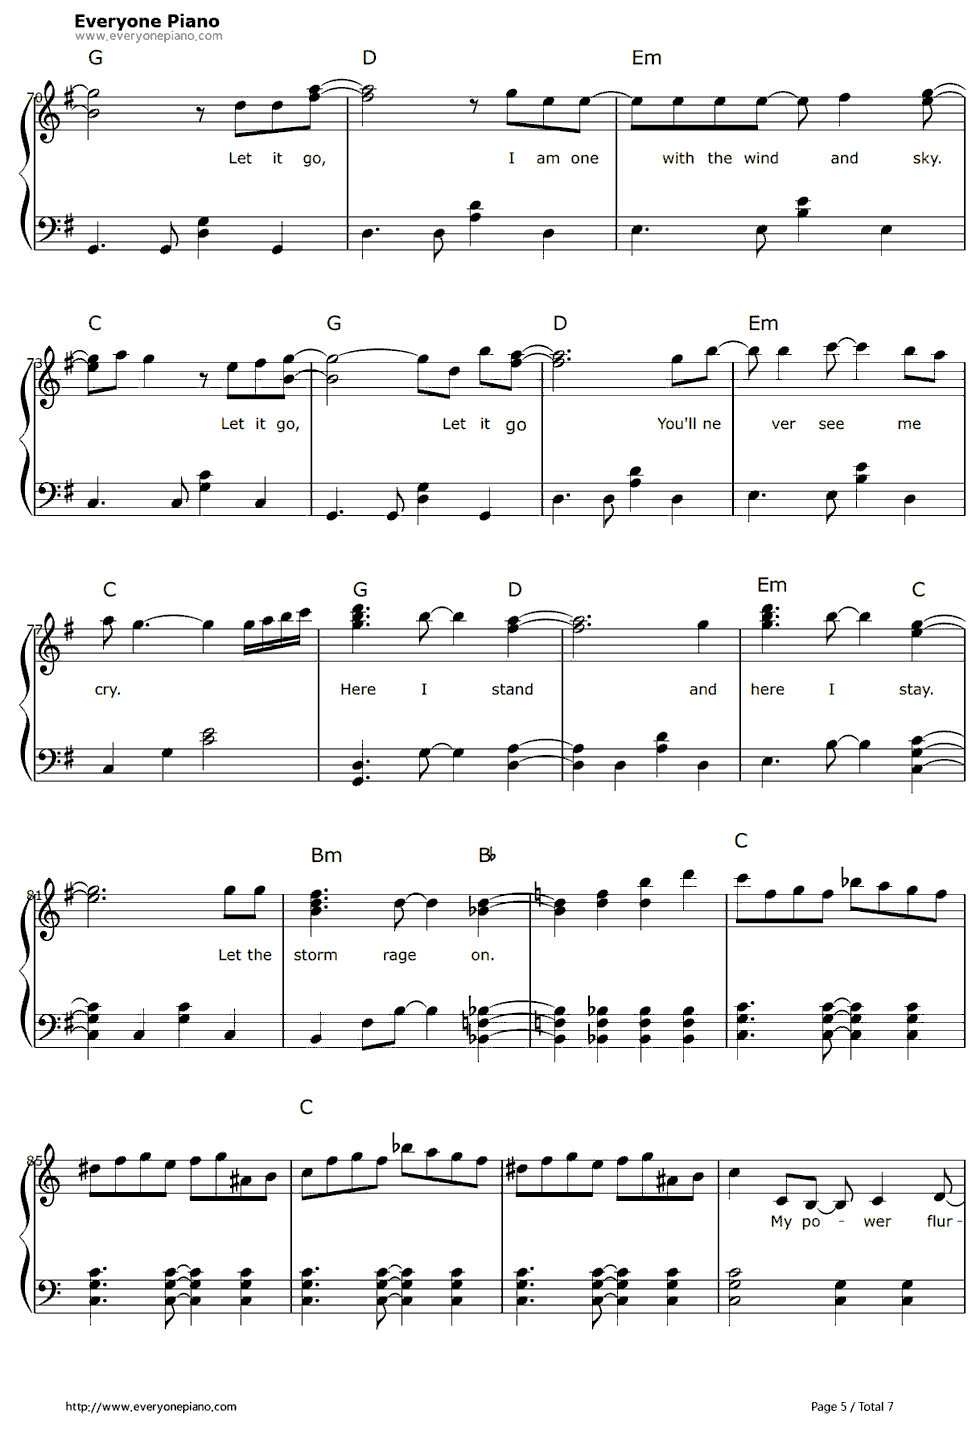 Free Let It Go Easy Version-Frozen Theme Sheet Music Preview 5 - Let It Go Violin Sheet Music Free Printable